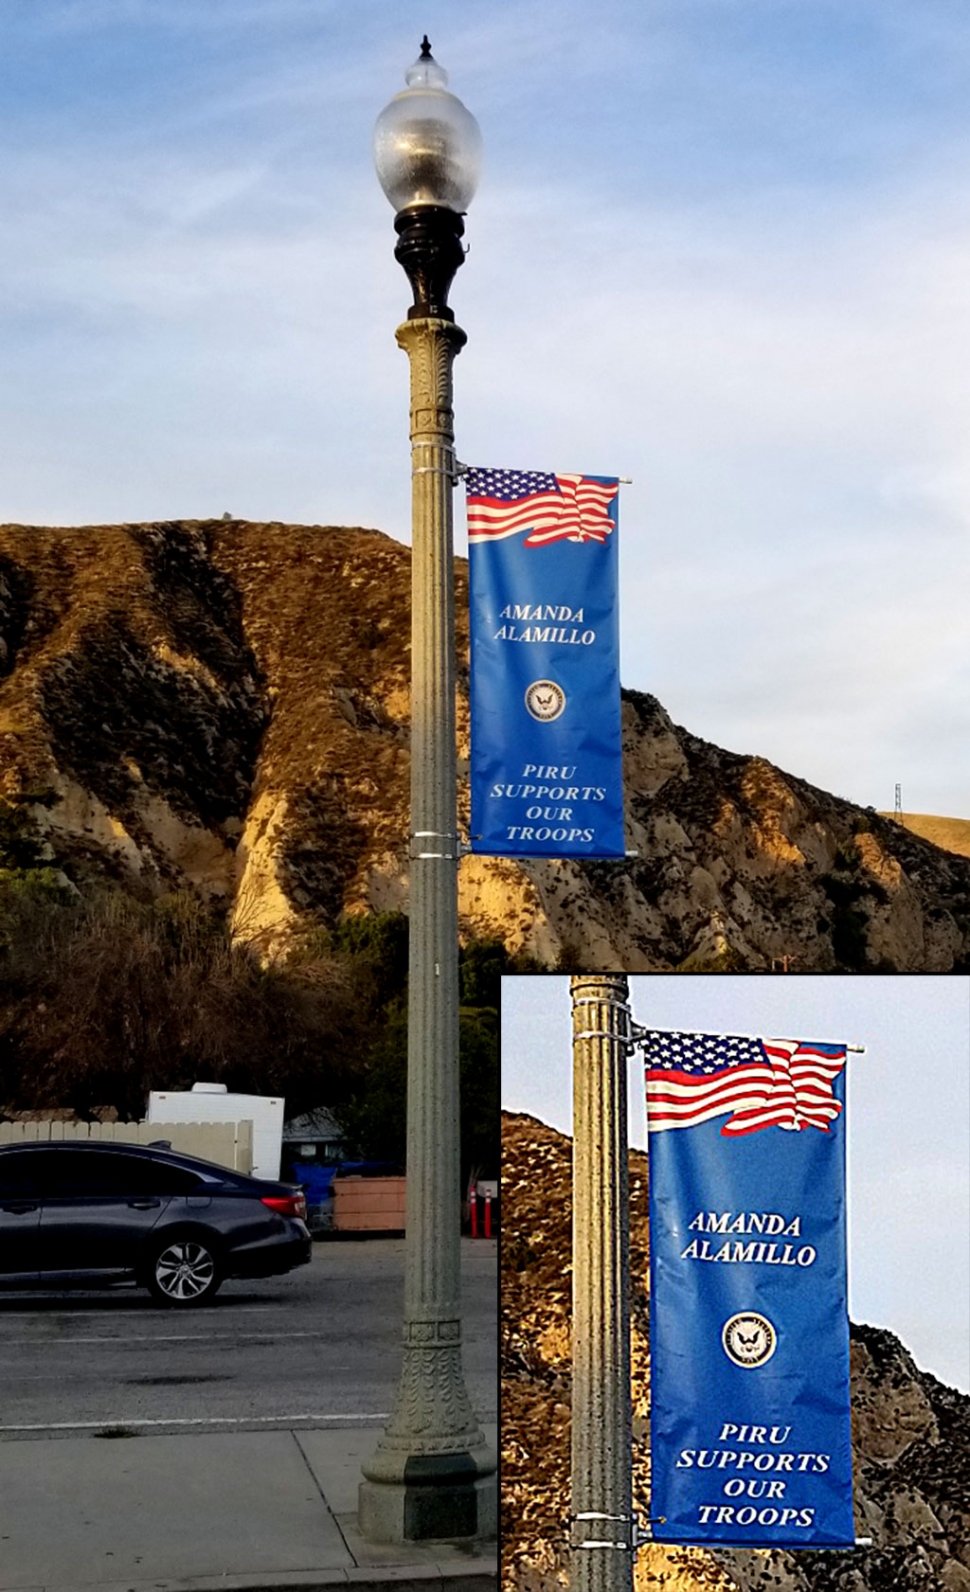 If you walk down Center Street in Piru and take a look up at the streetlights you will see military banners hanging in honor of those serving or who have served our country from the Piru community. Inset is a close up of what the banners look like, each banner reads “Piru Supports our Troops” with the service person’s name displayed.